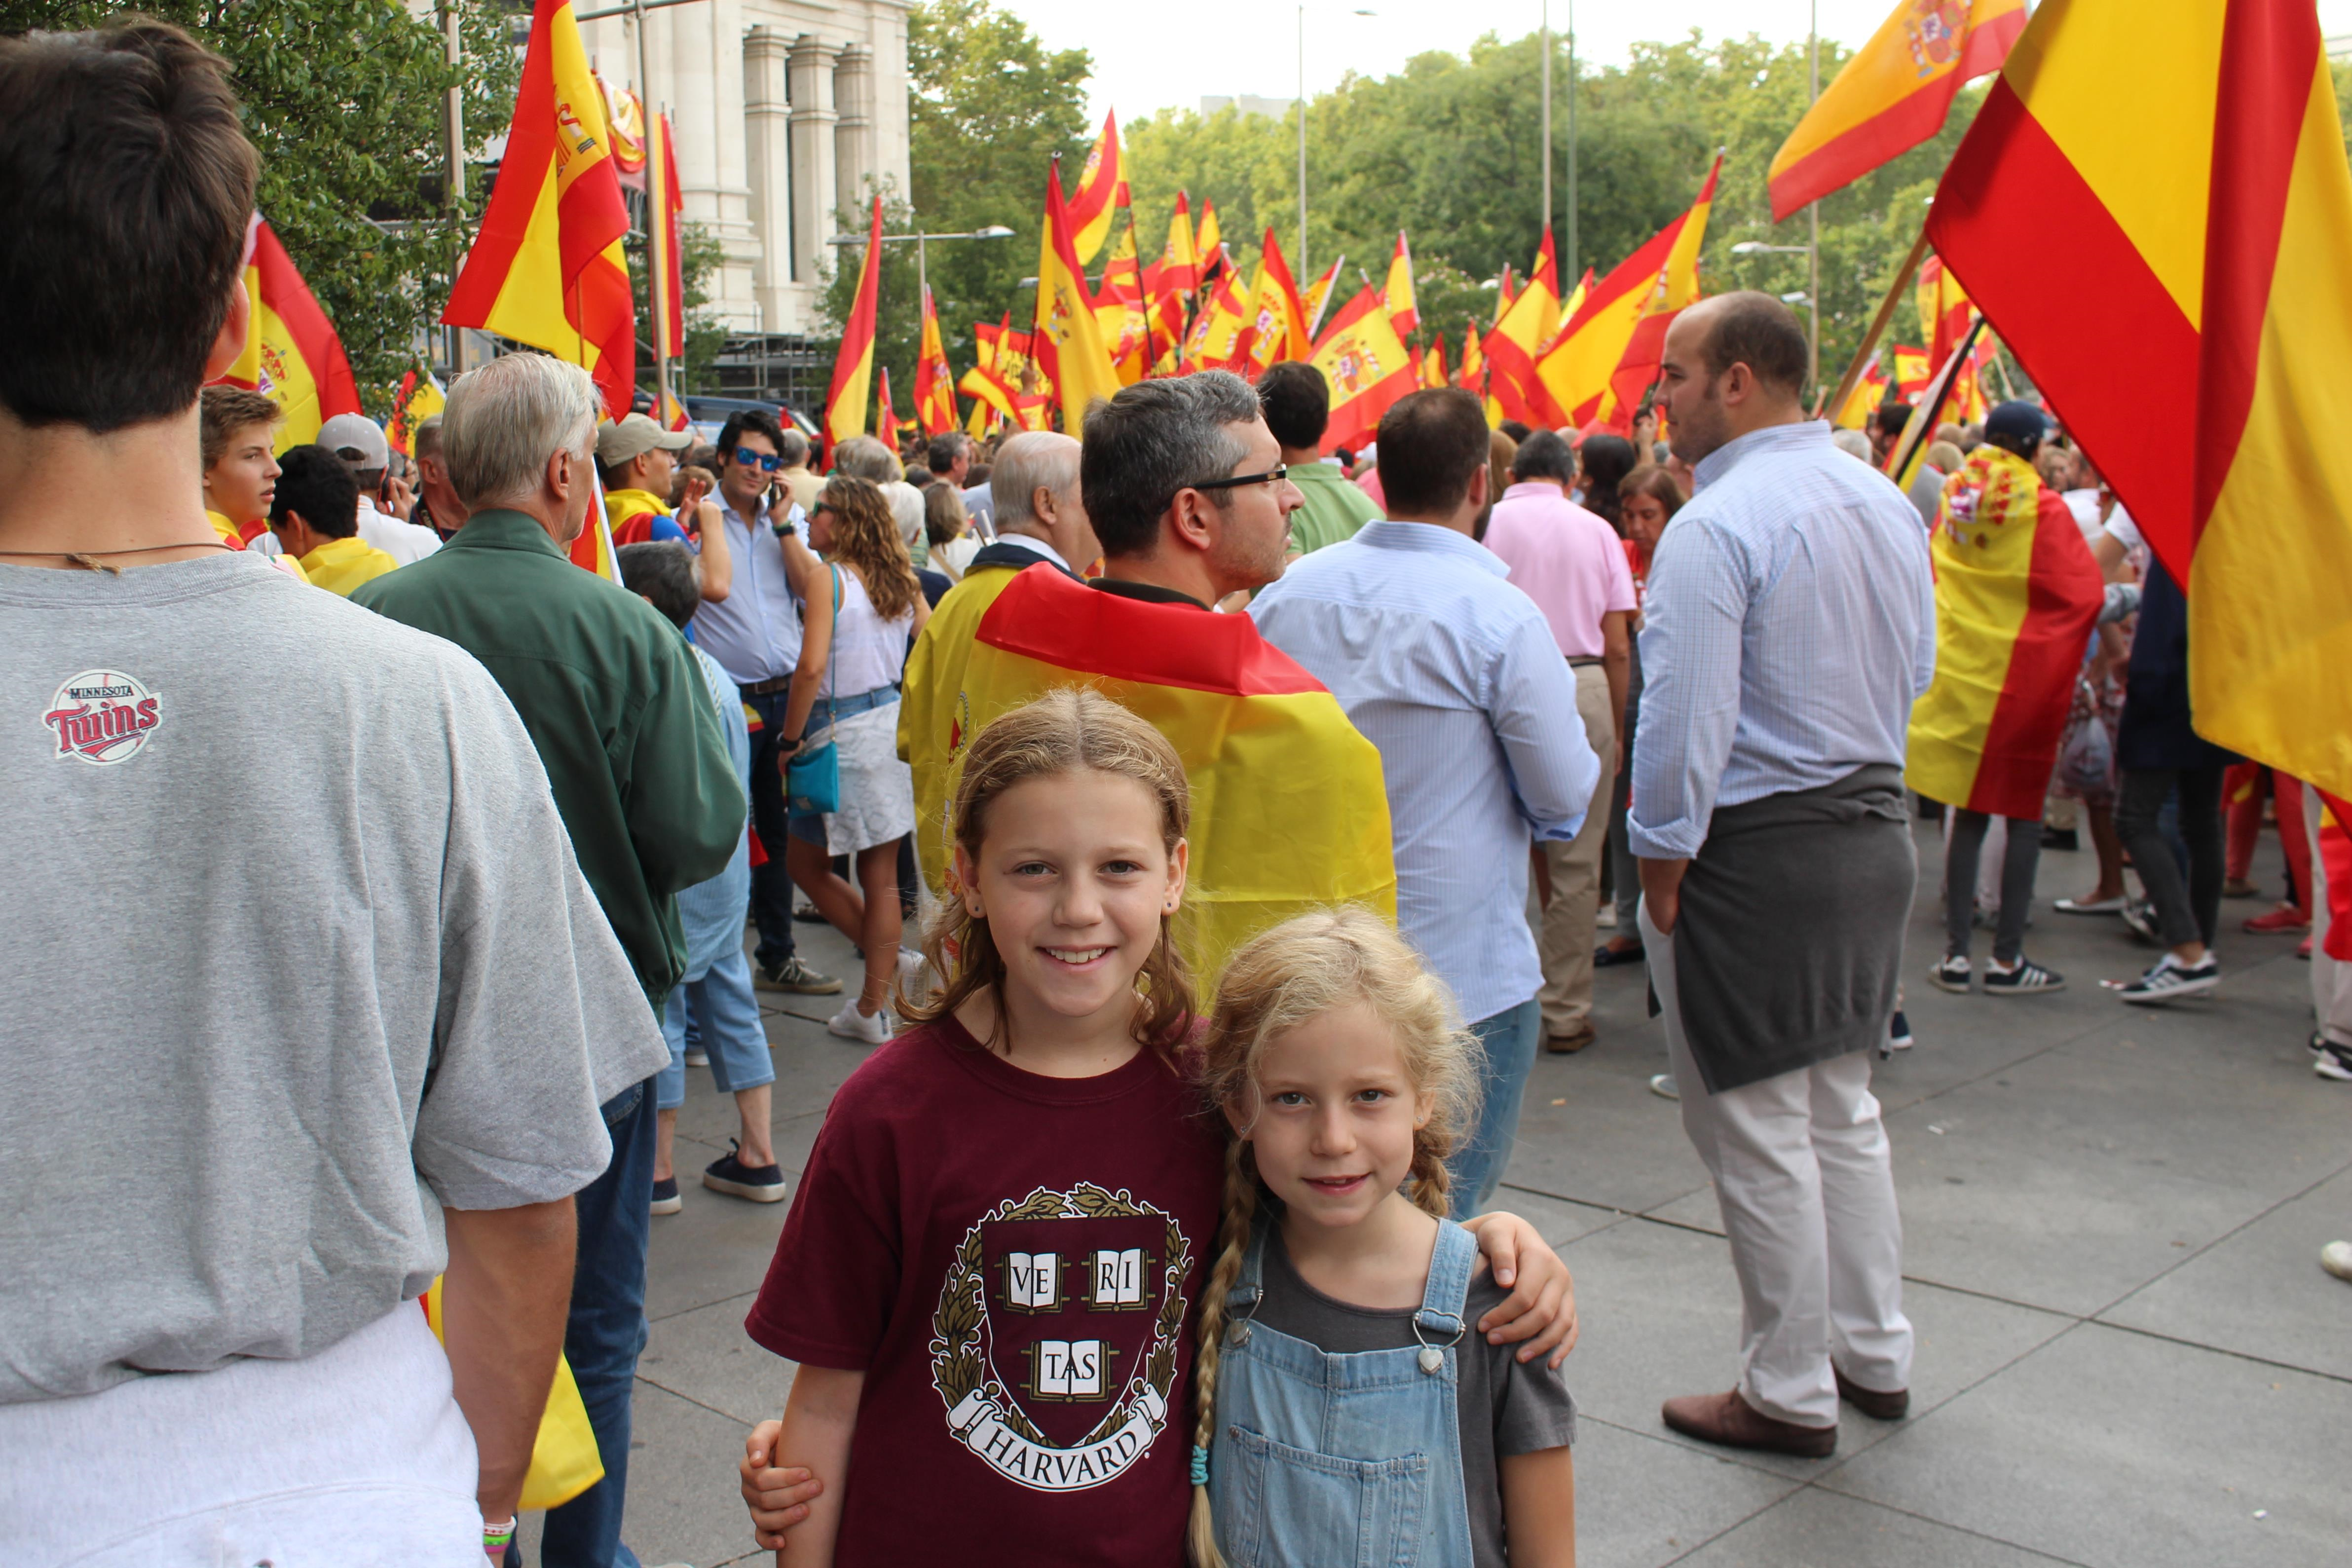 A protest in Madrid Spain against the Catalan independence movement. 